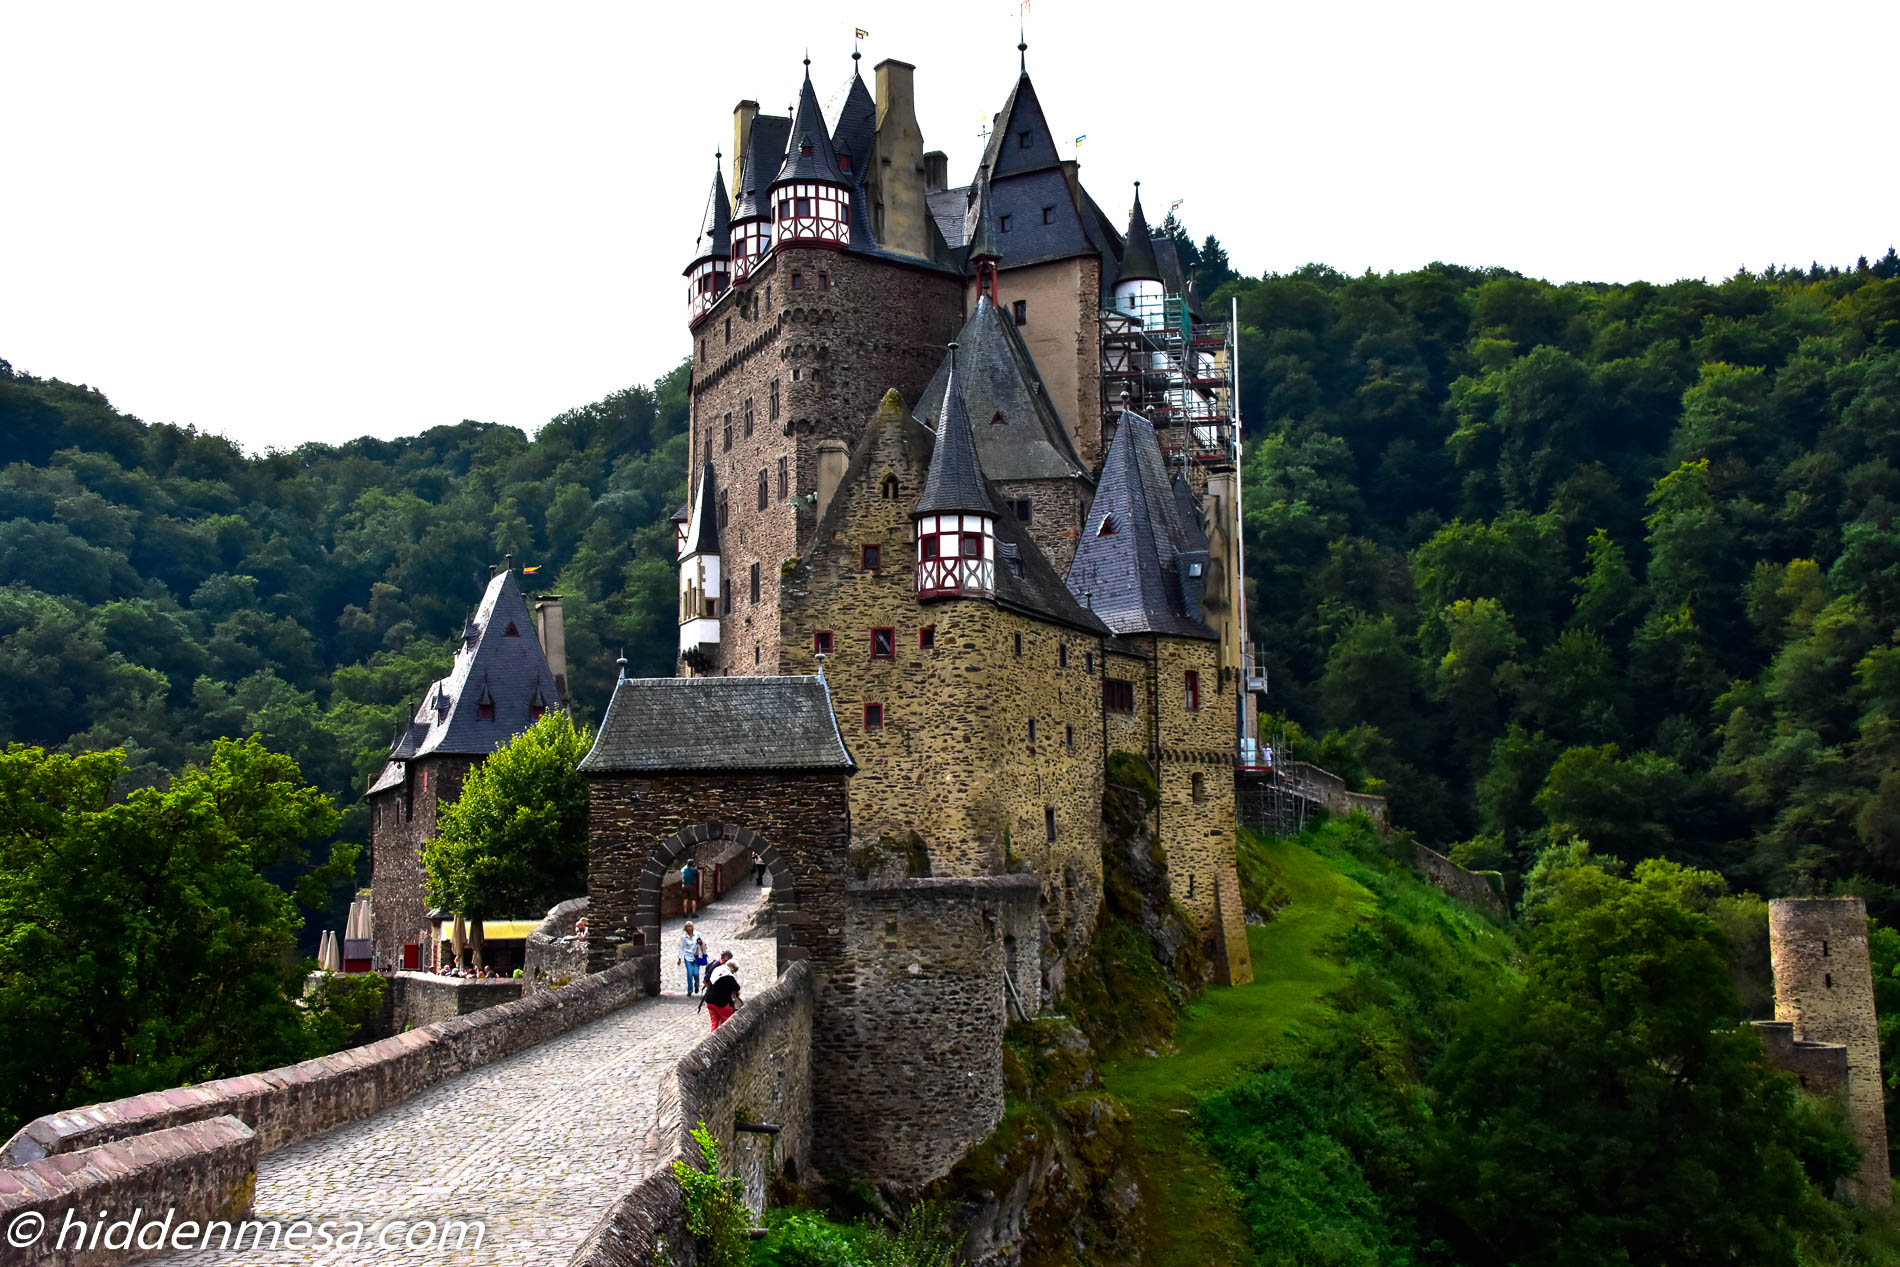 The Eltz Castle – One Family’s Home For 850 Years